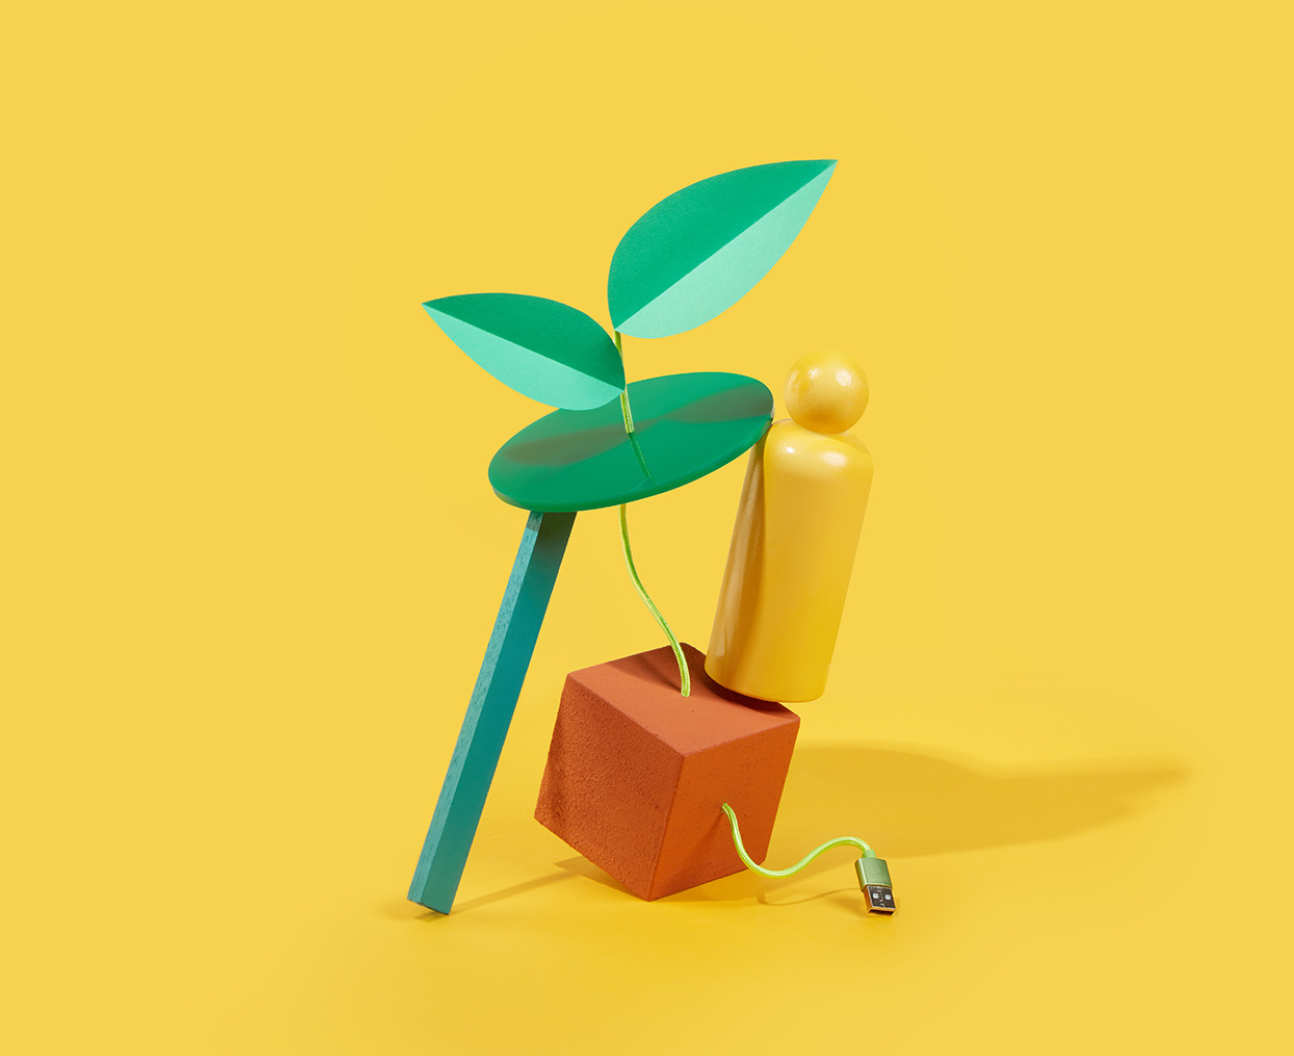 A digital illustration of a green plant connected to an orange cube by a USB cable and a yellow playing piece representing a human form perched on top precariously